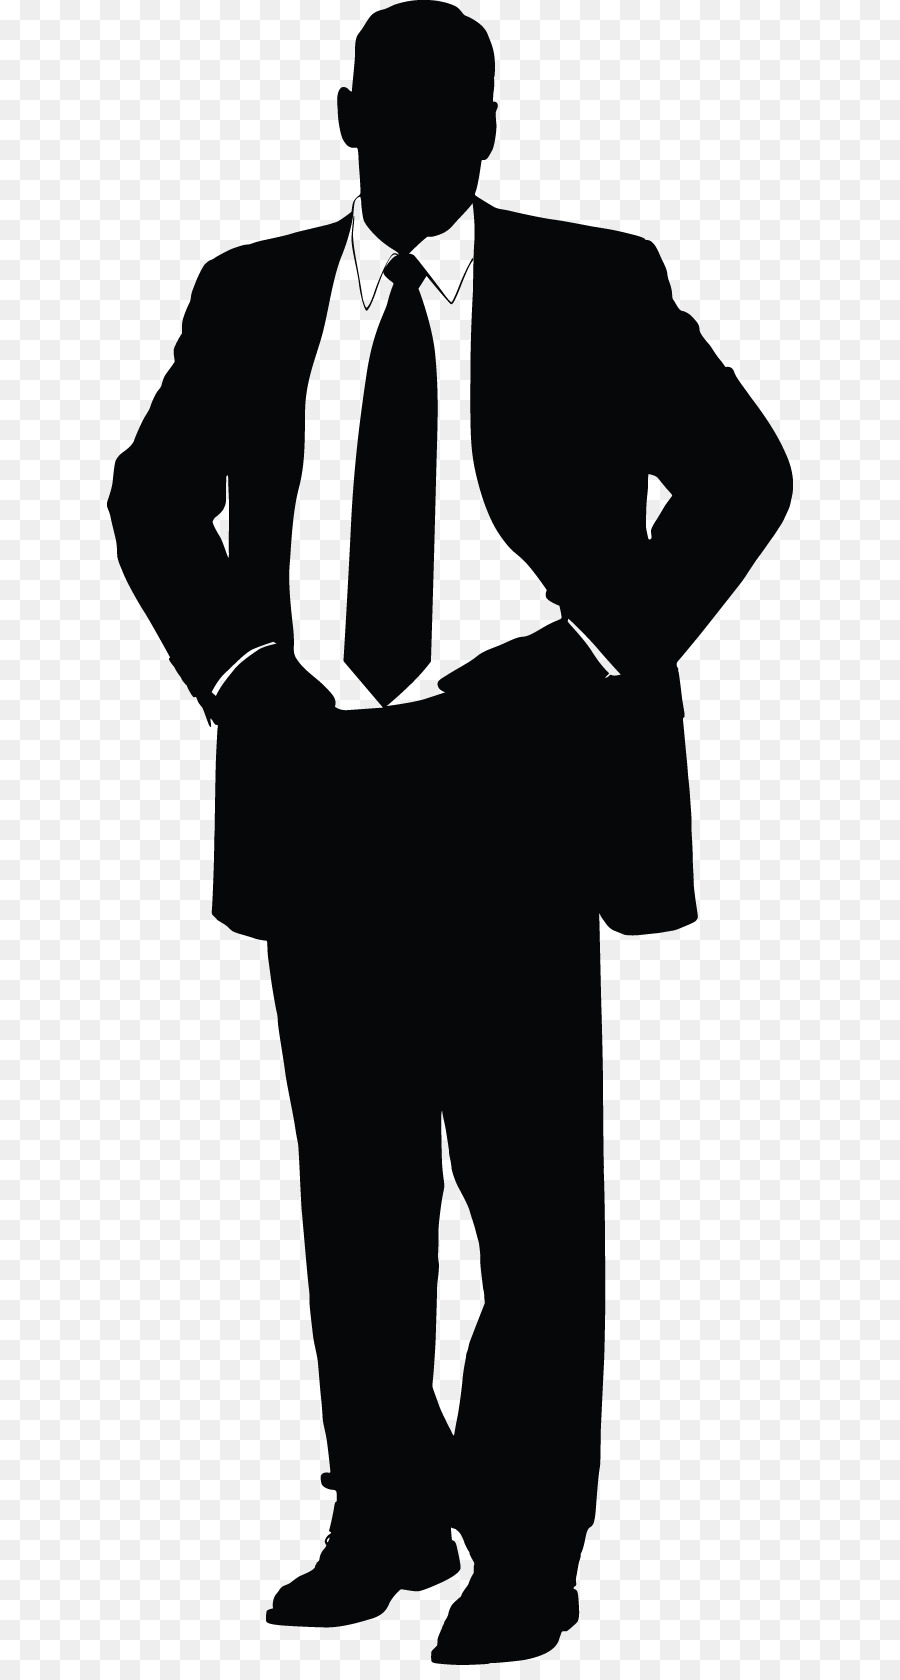 Man In Suit Silhouette Png